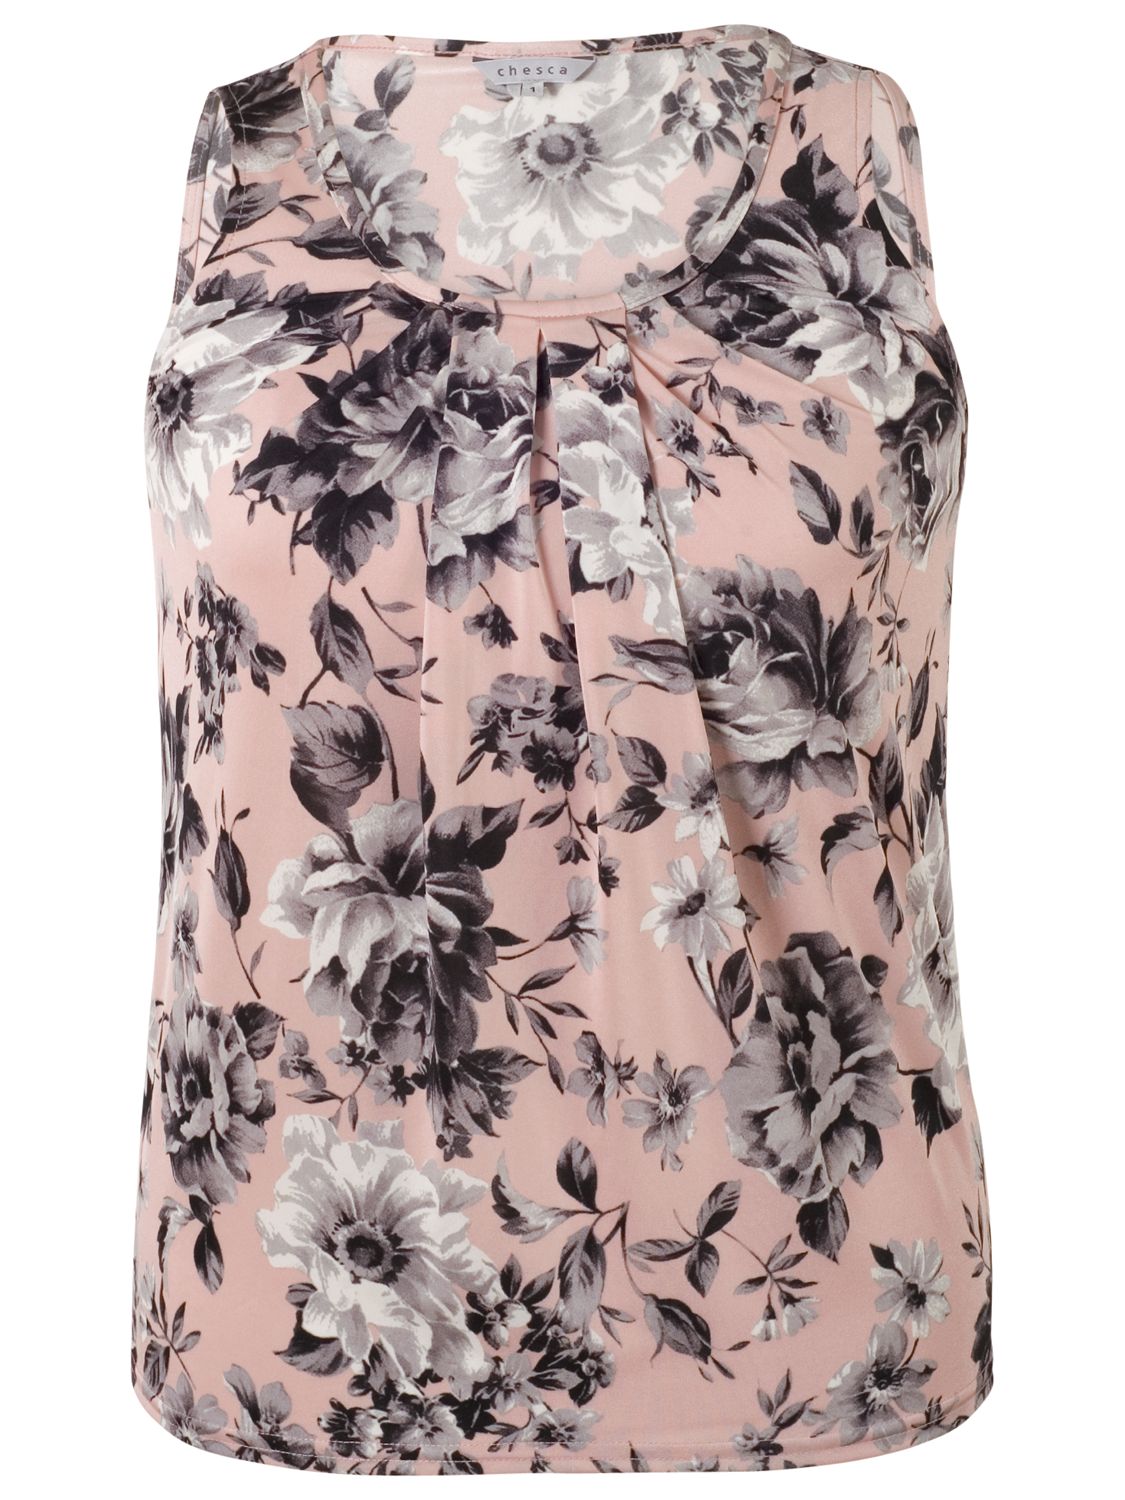 Chesca Rose Print Tuck Top, Powder Pink